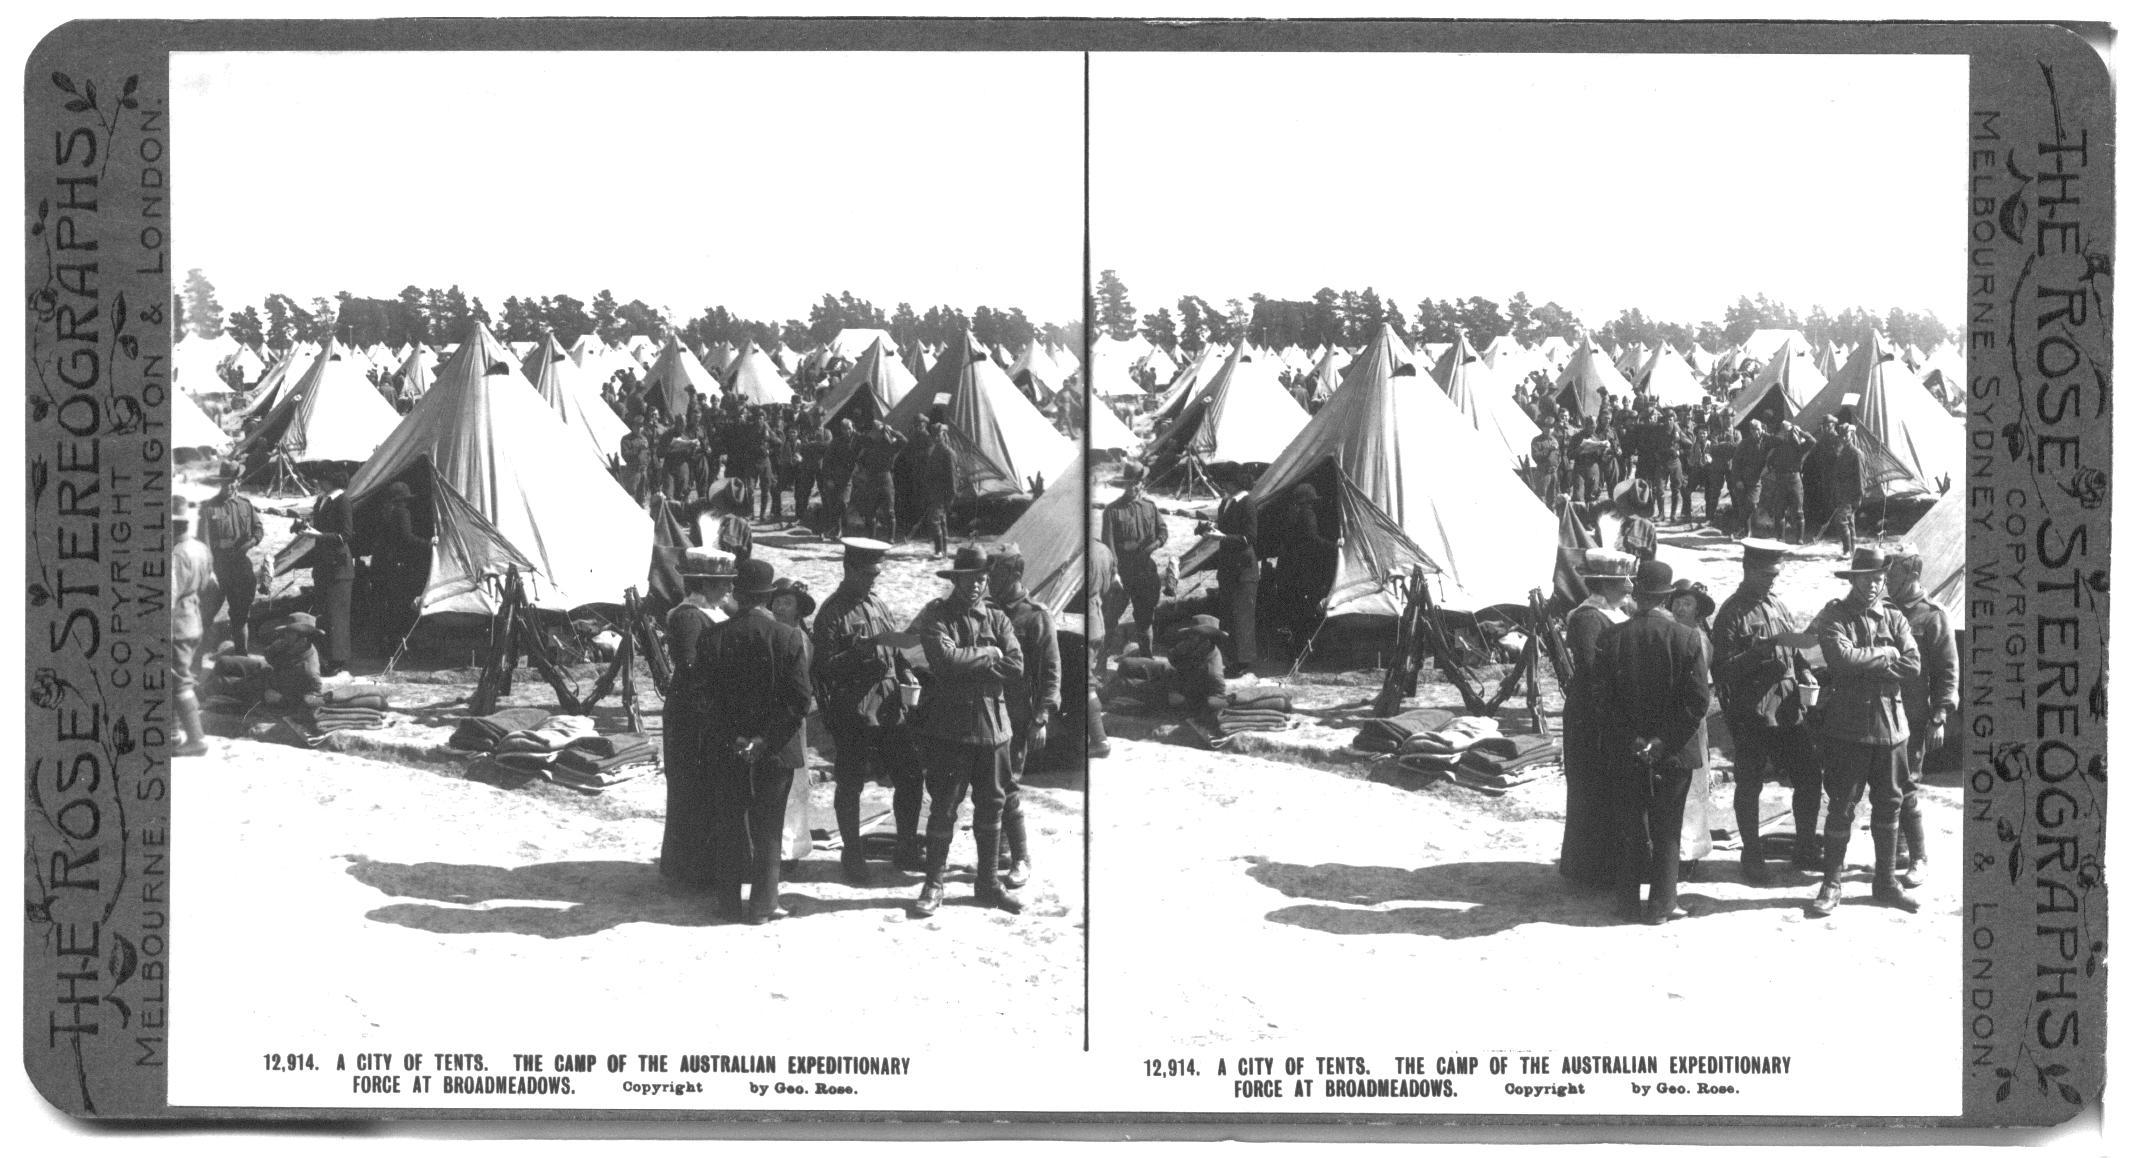 A CITY OF TENTS. THE CAMP OF THE AUSTRALIAN EXPEDITIONARY FORCE AT BROADMEADOWS.